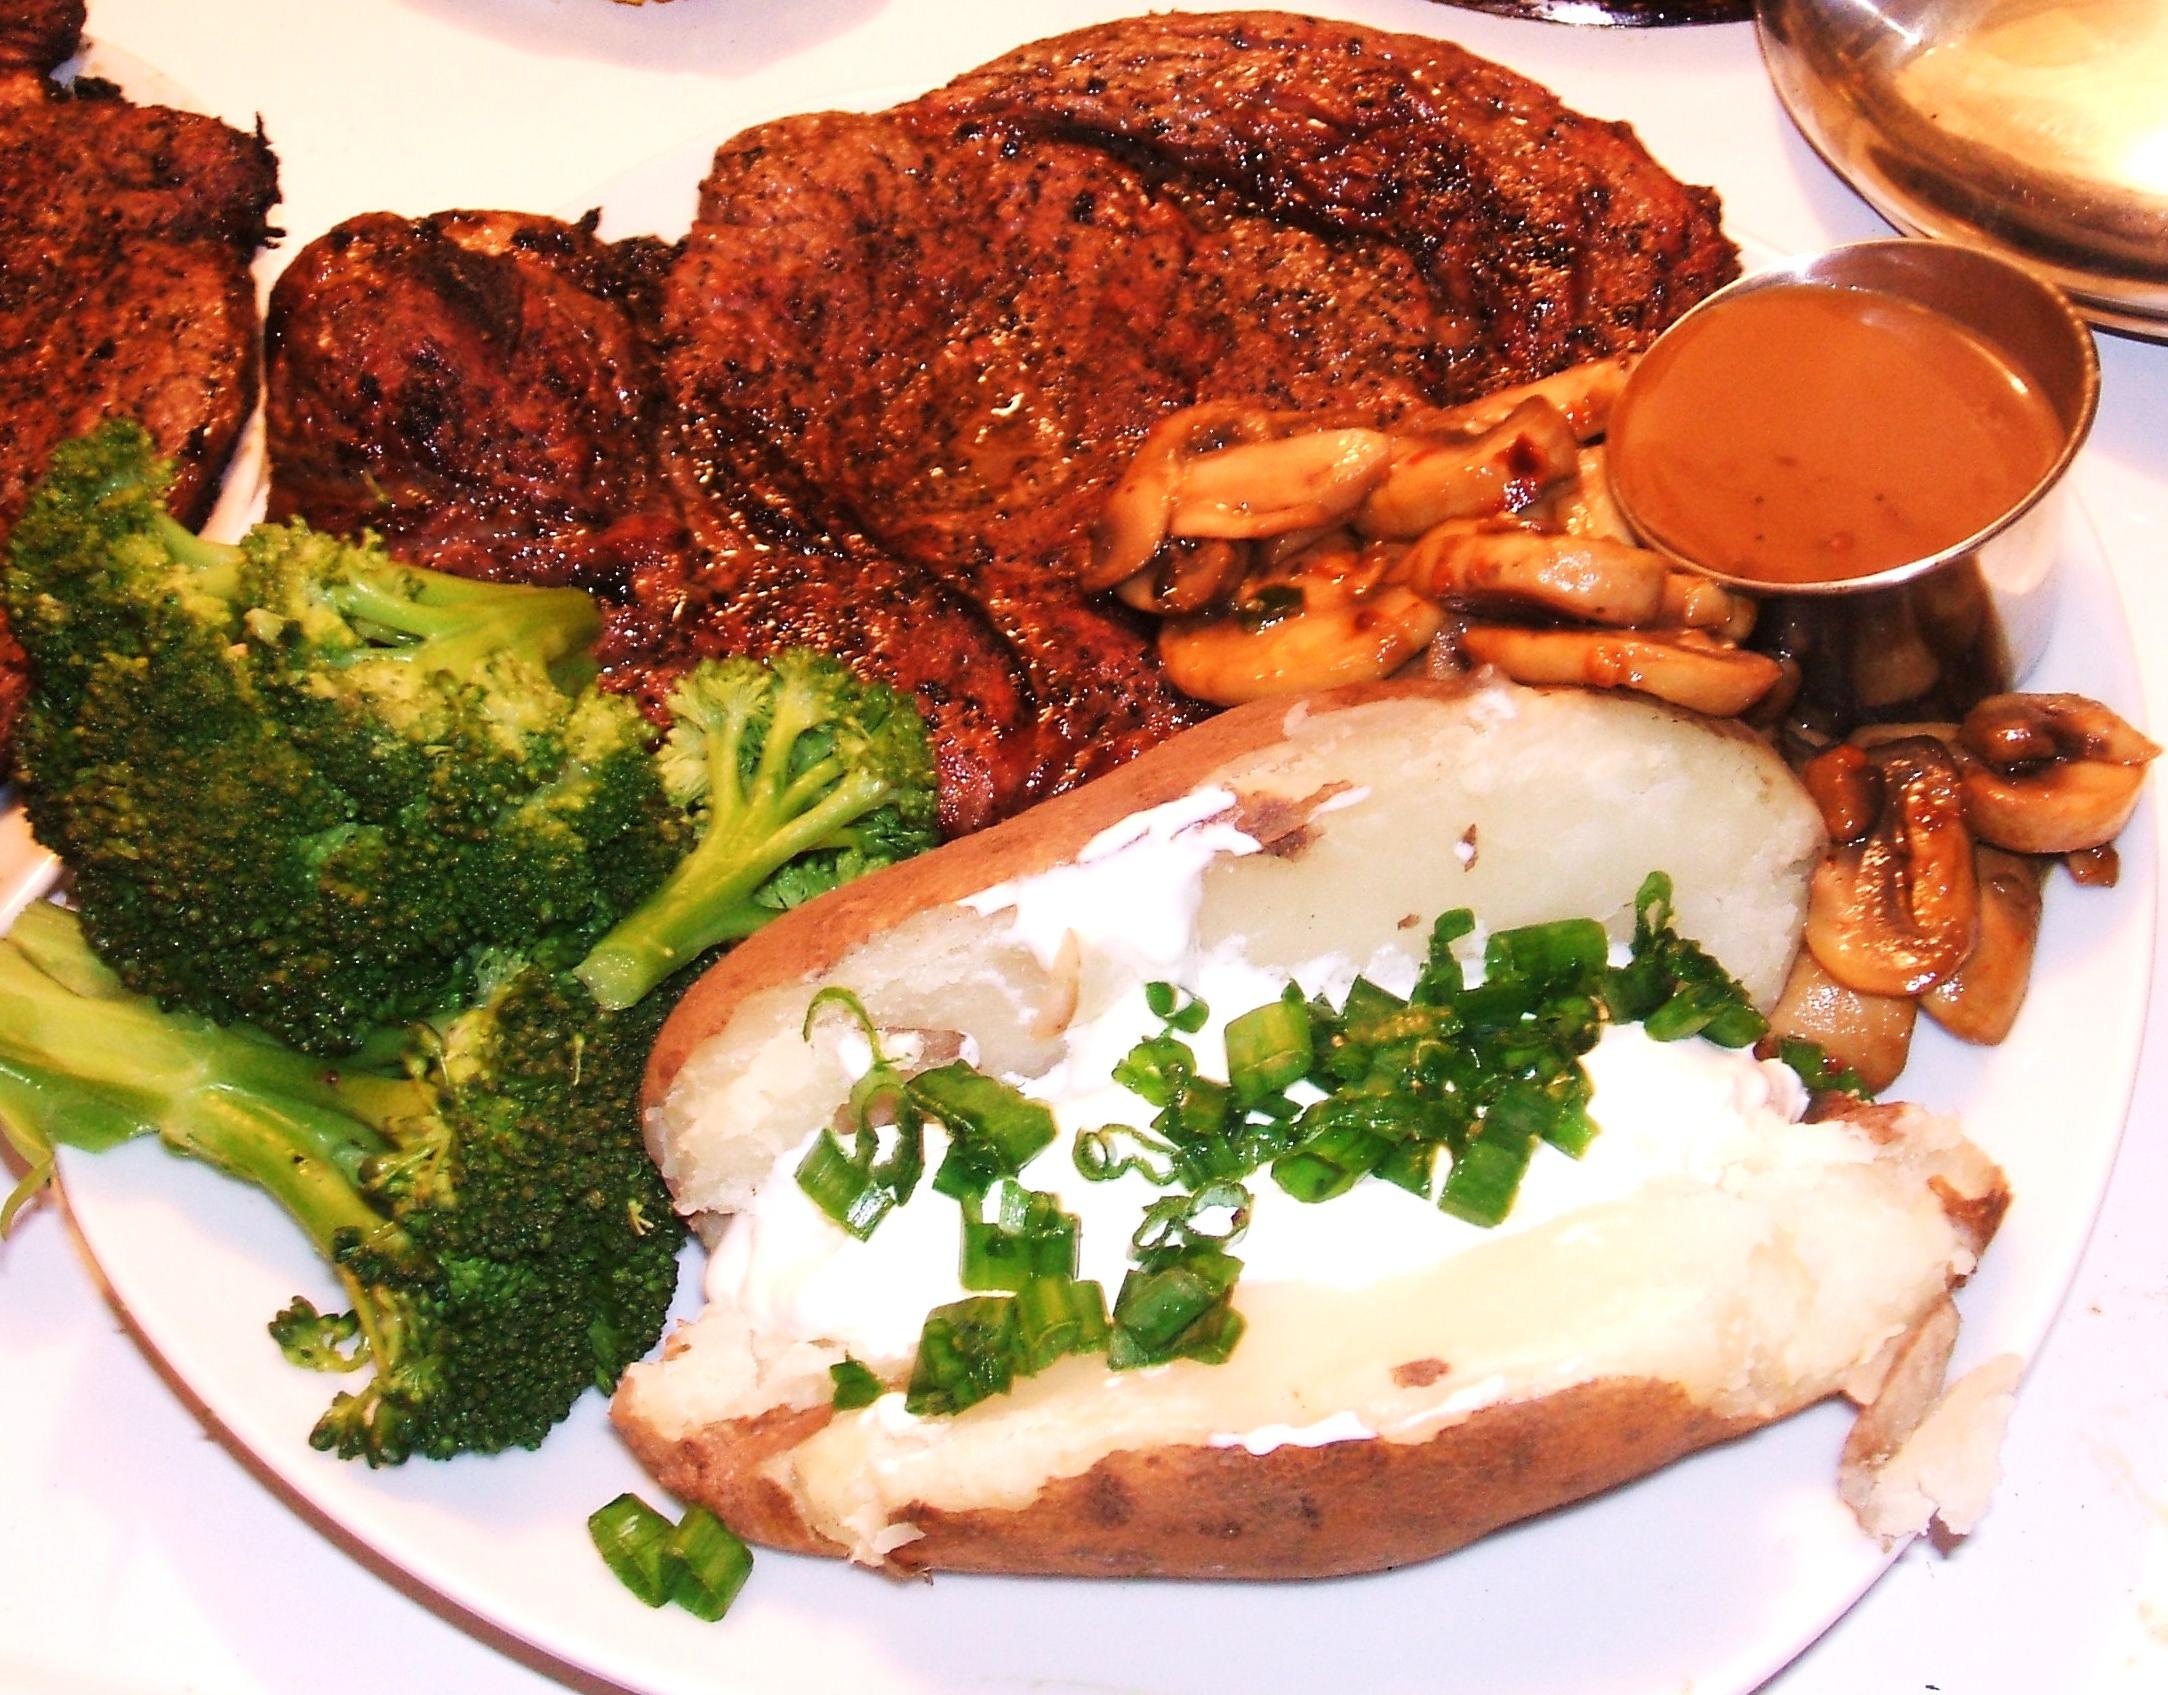  Saddle up for a steak that's full of flavor with this cowboy coffee rubbed recipe.